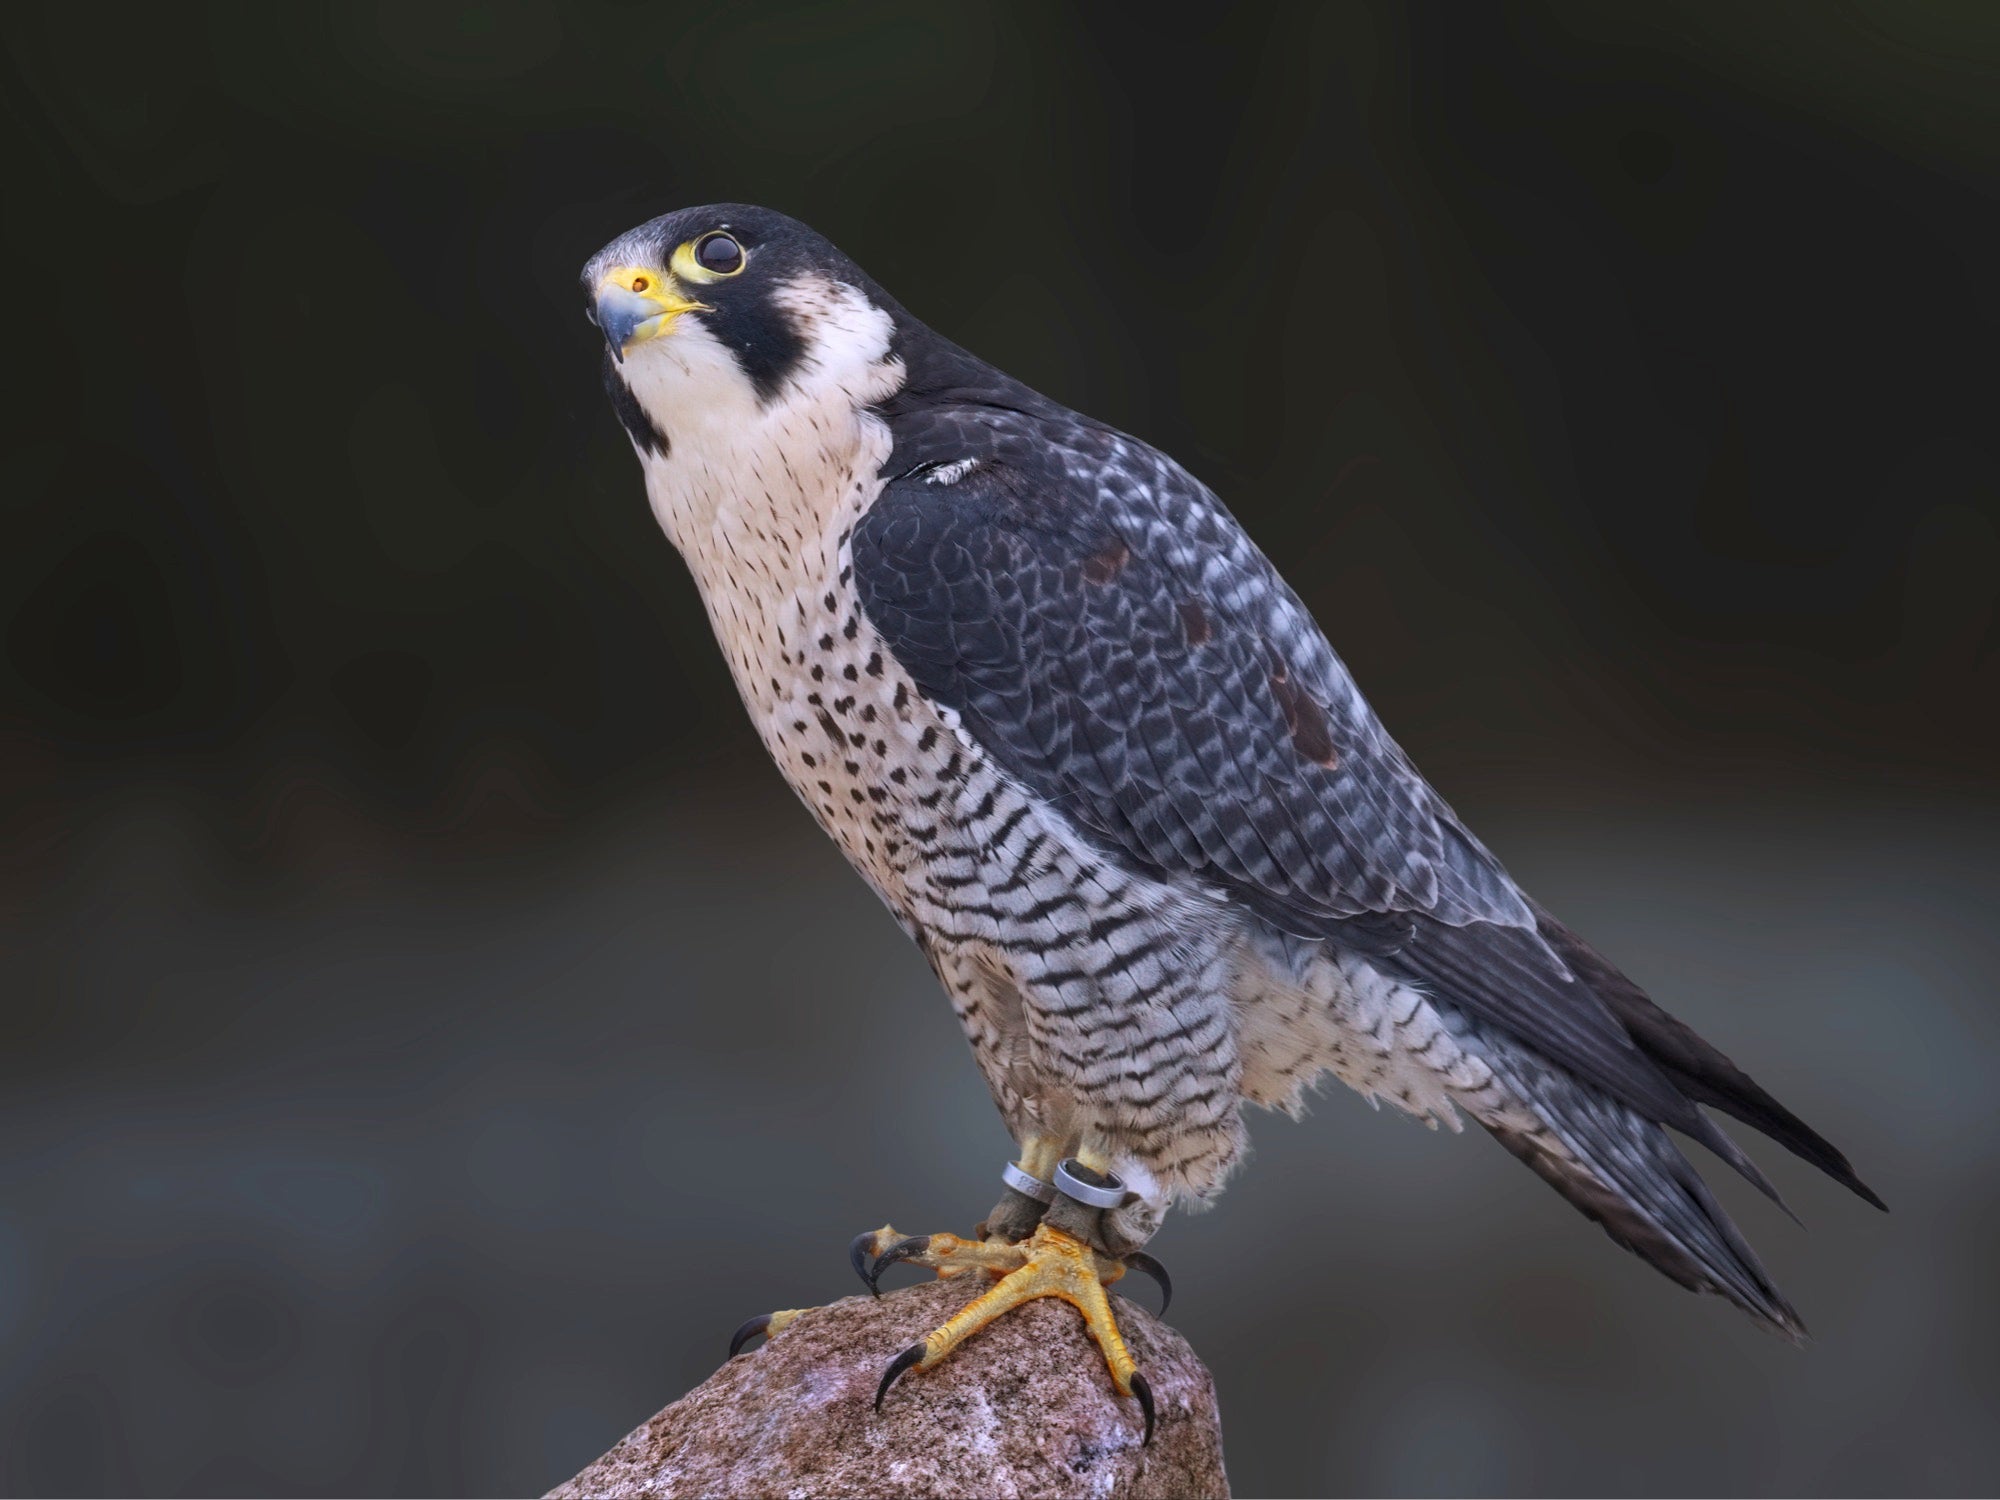 A peregrine falcon's power to migrate may lie in its DNA | Popular Science